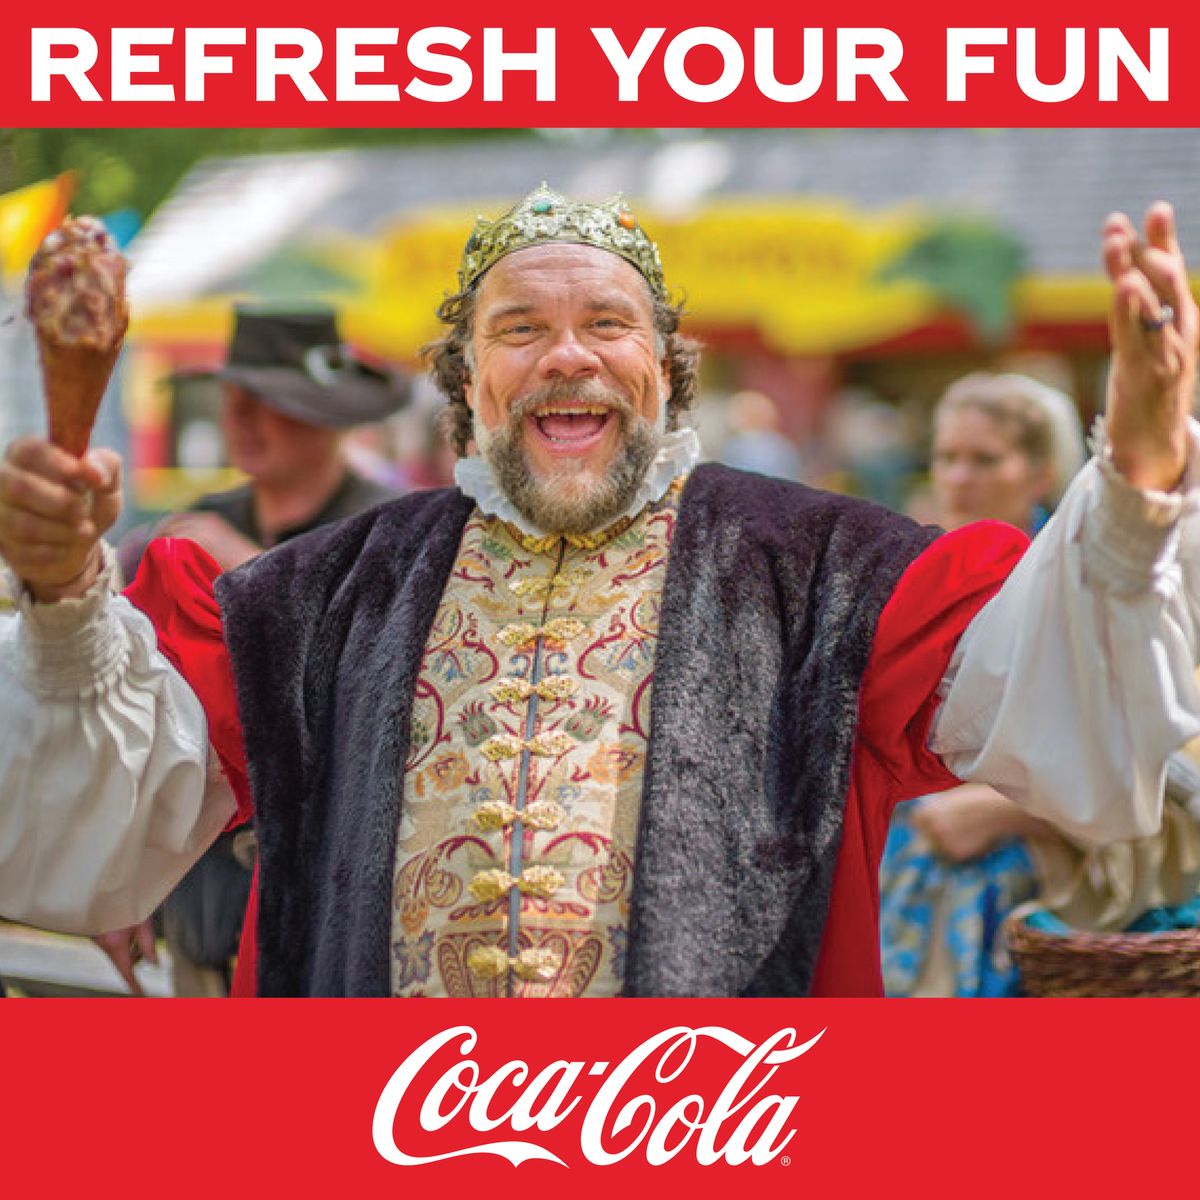 Enjoy a Coca-Cola this fall at @KRFaire! New England’s premiere, family entertainment event in Carver, MA is open weekends Sept. 2nd-Oct 22nd, including the 2 Monday Holidays. Use promo code MYCOKE-KRF23 for $5 OFF your ticket purchase at: hubs.la/Q020947y0.